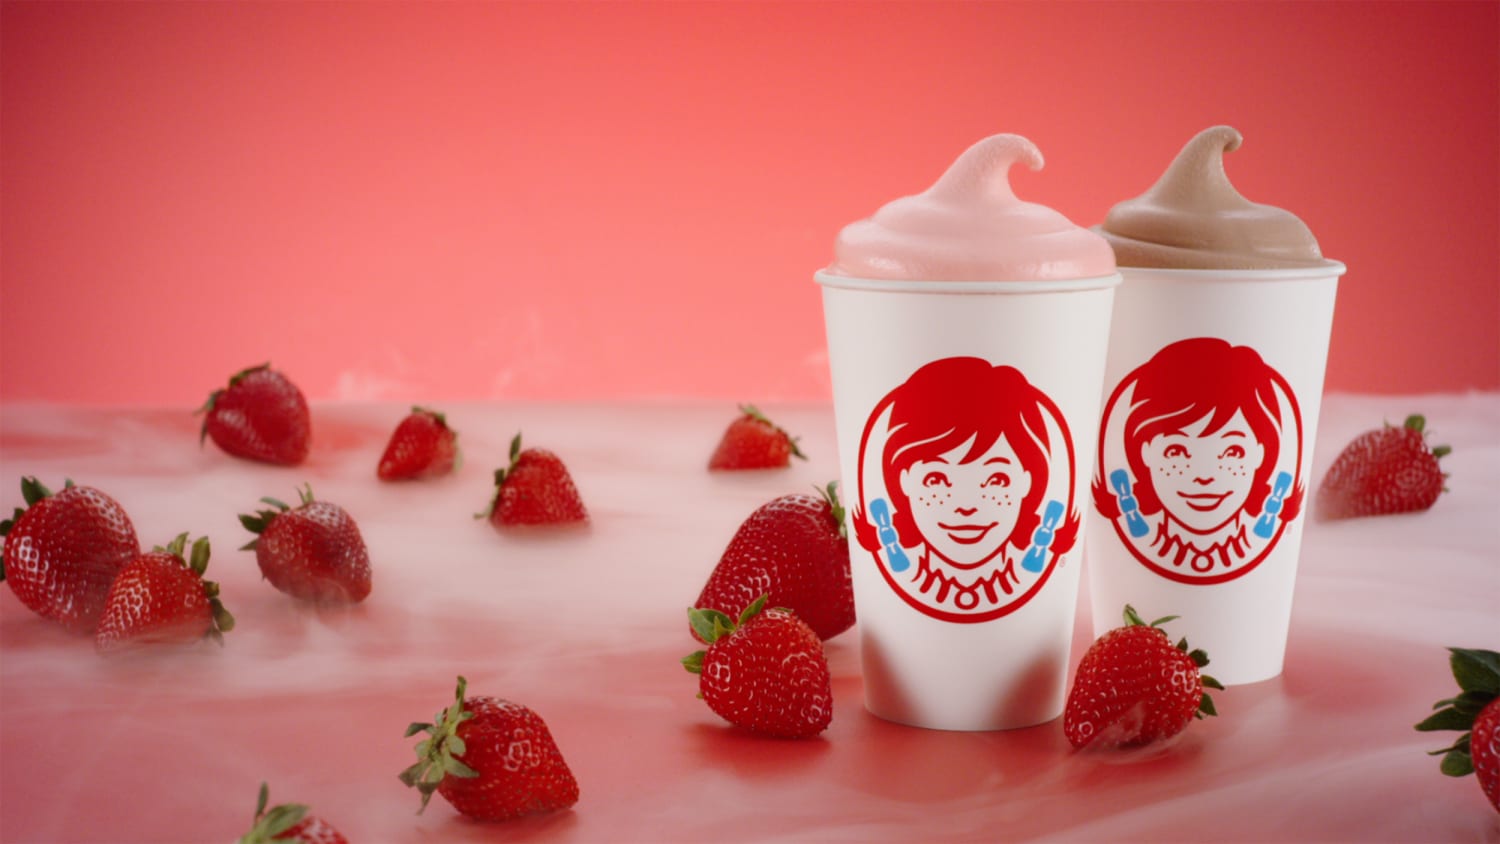 Wendy's is bringing back frosty strawberries for summer